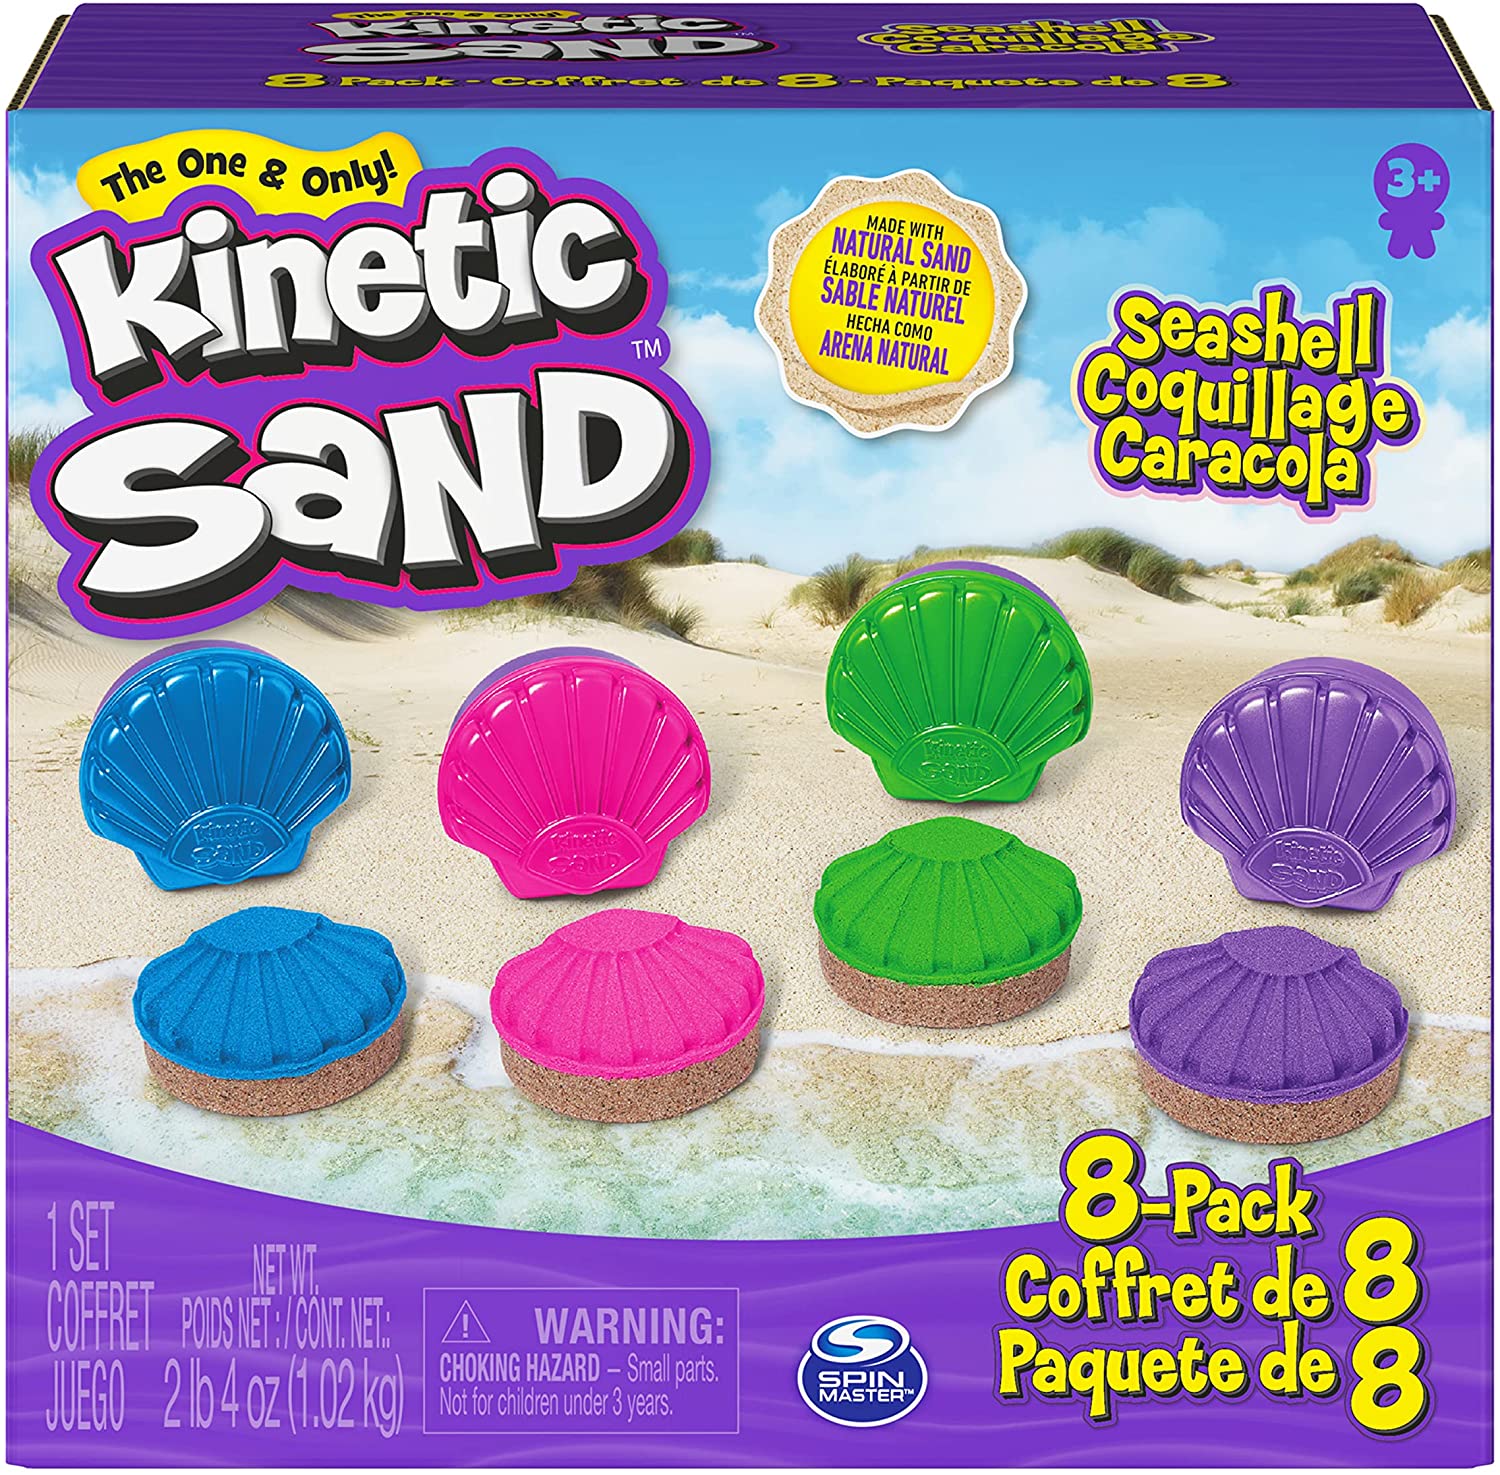 8-Pack Kinetic Sand, Seashell Container Molds Playset (4 Colors) $9 + FS w/ Walmart+, FS on $35+ or FS w/ Amazon Prime, FS on $25+